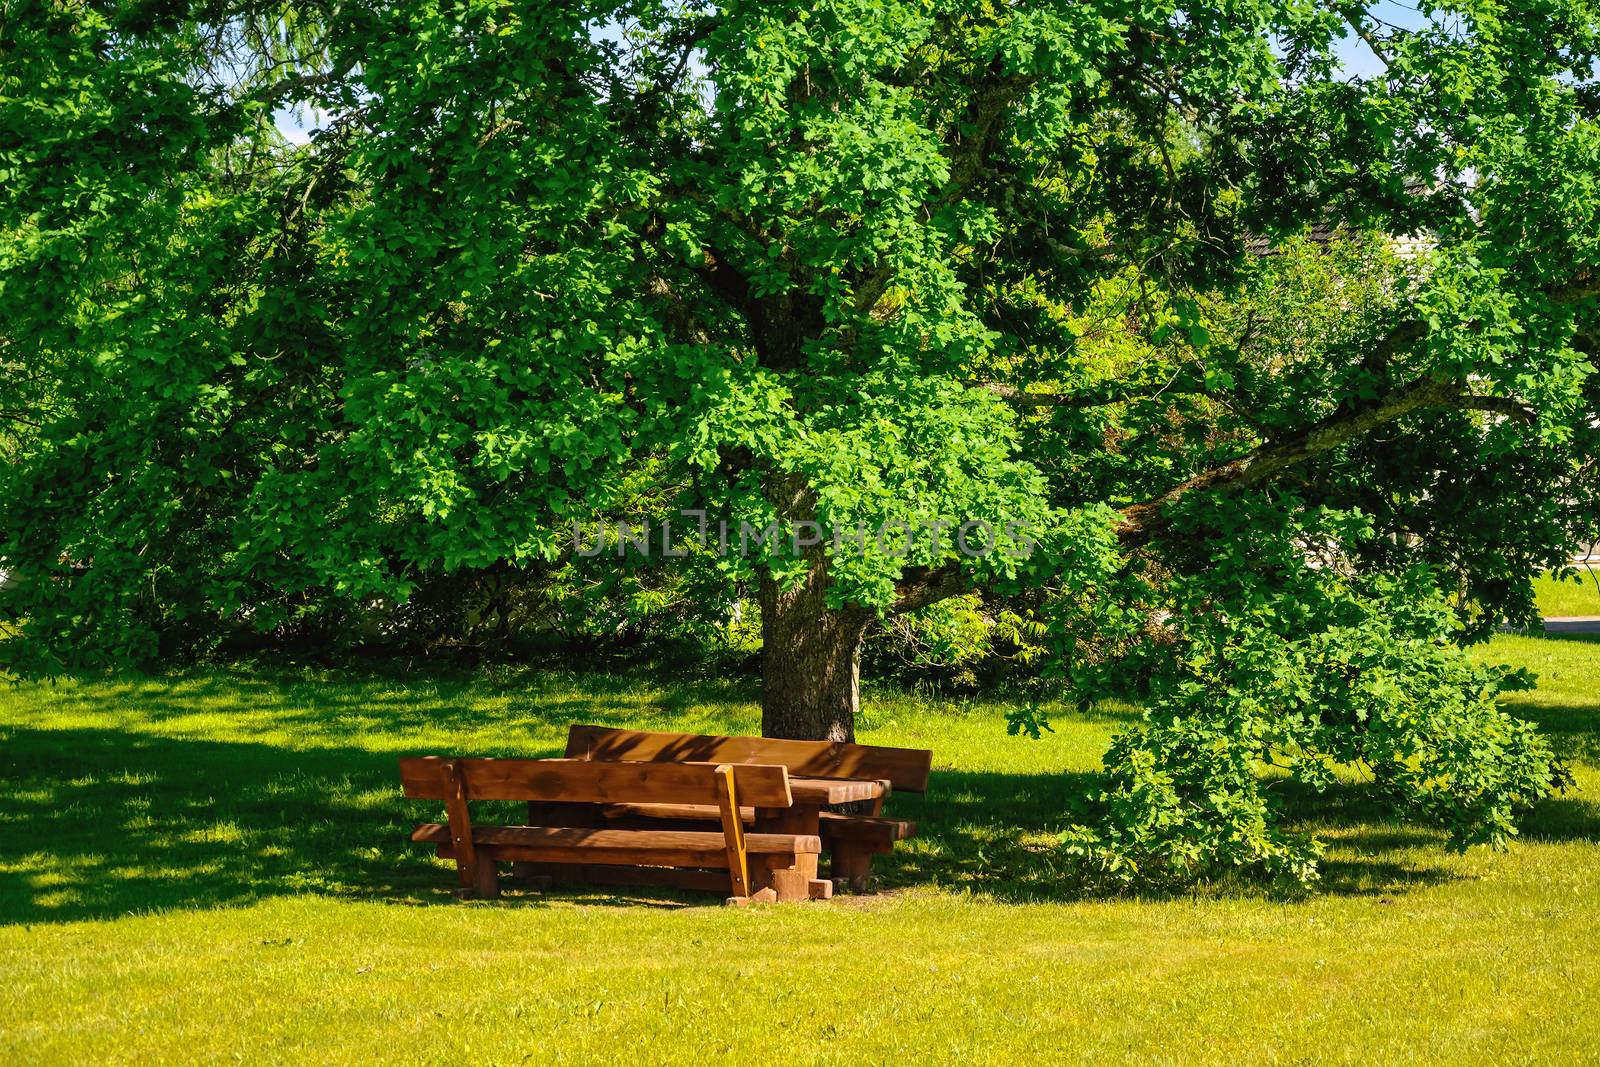 Benches and table under the big oak tree on the green lawn